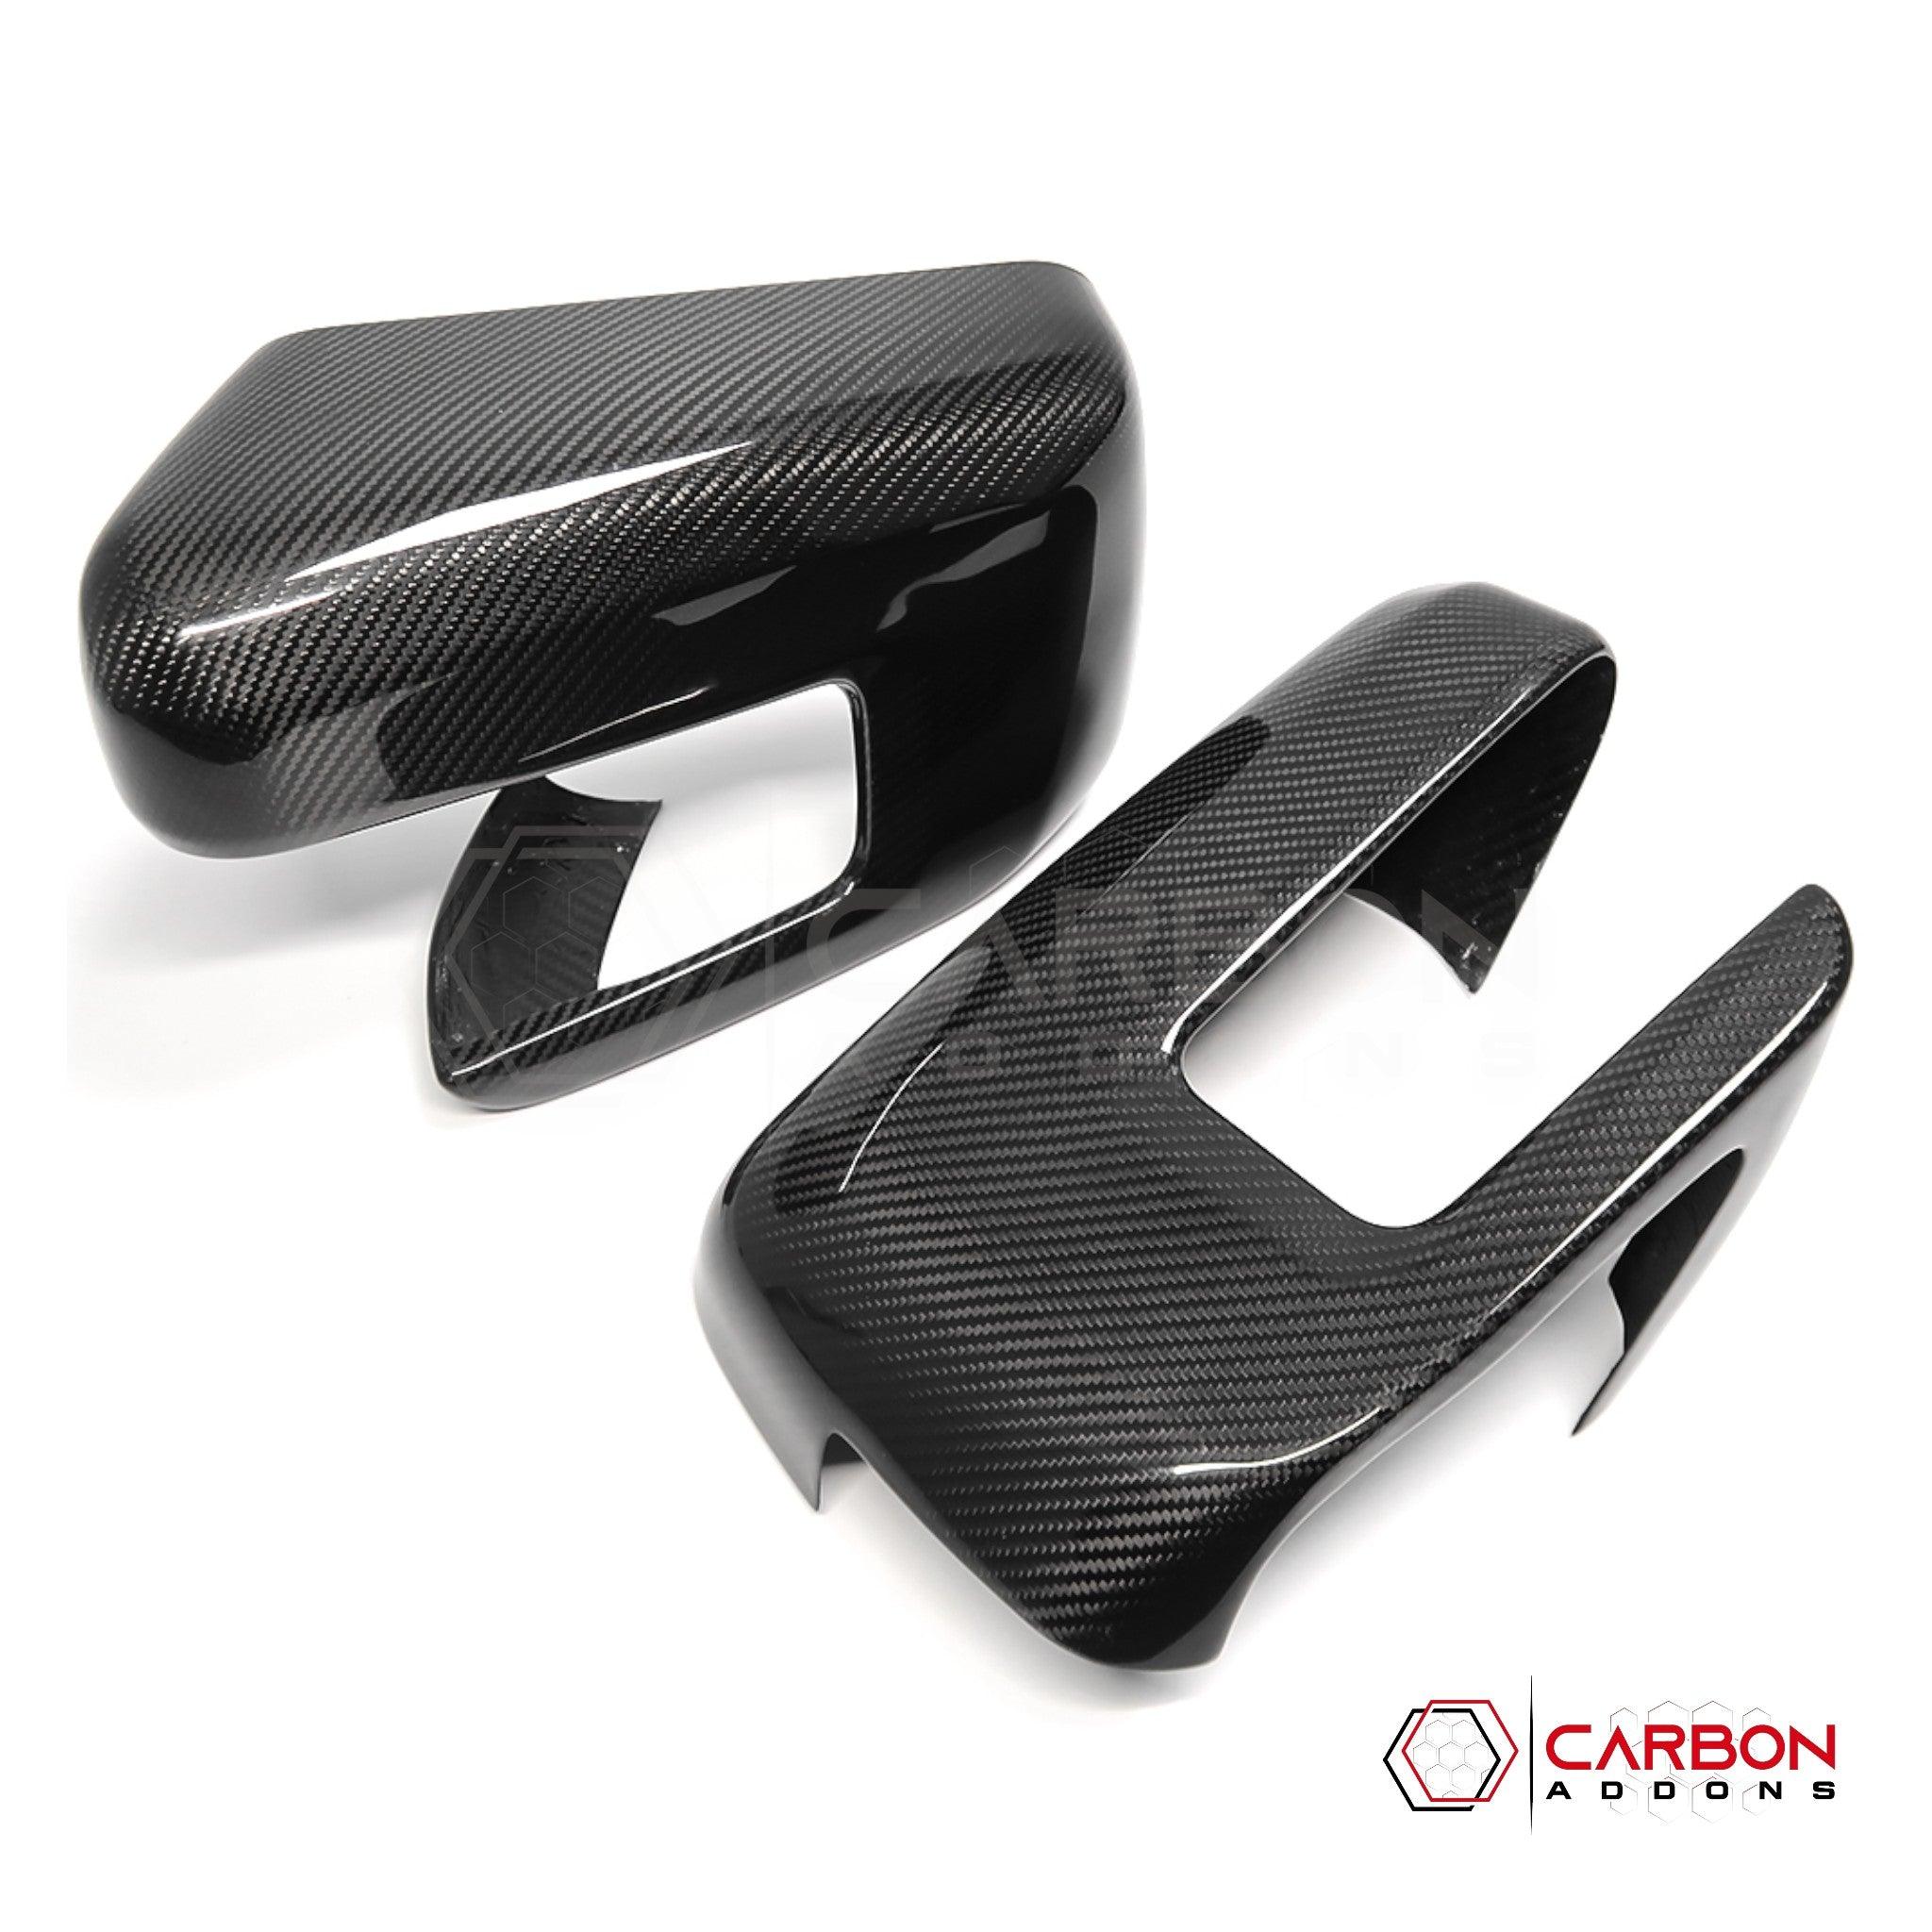 [Coming Soon] Ford F150 2021-Up Side View Mirrors Hard Carbon Fiber Covers - carbonaddons Carbon Fiber Parts, Accessories, Upgrades, Mods